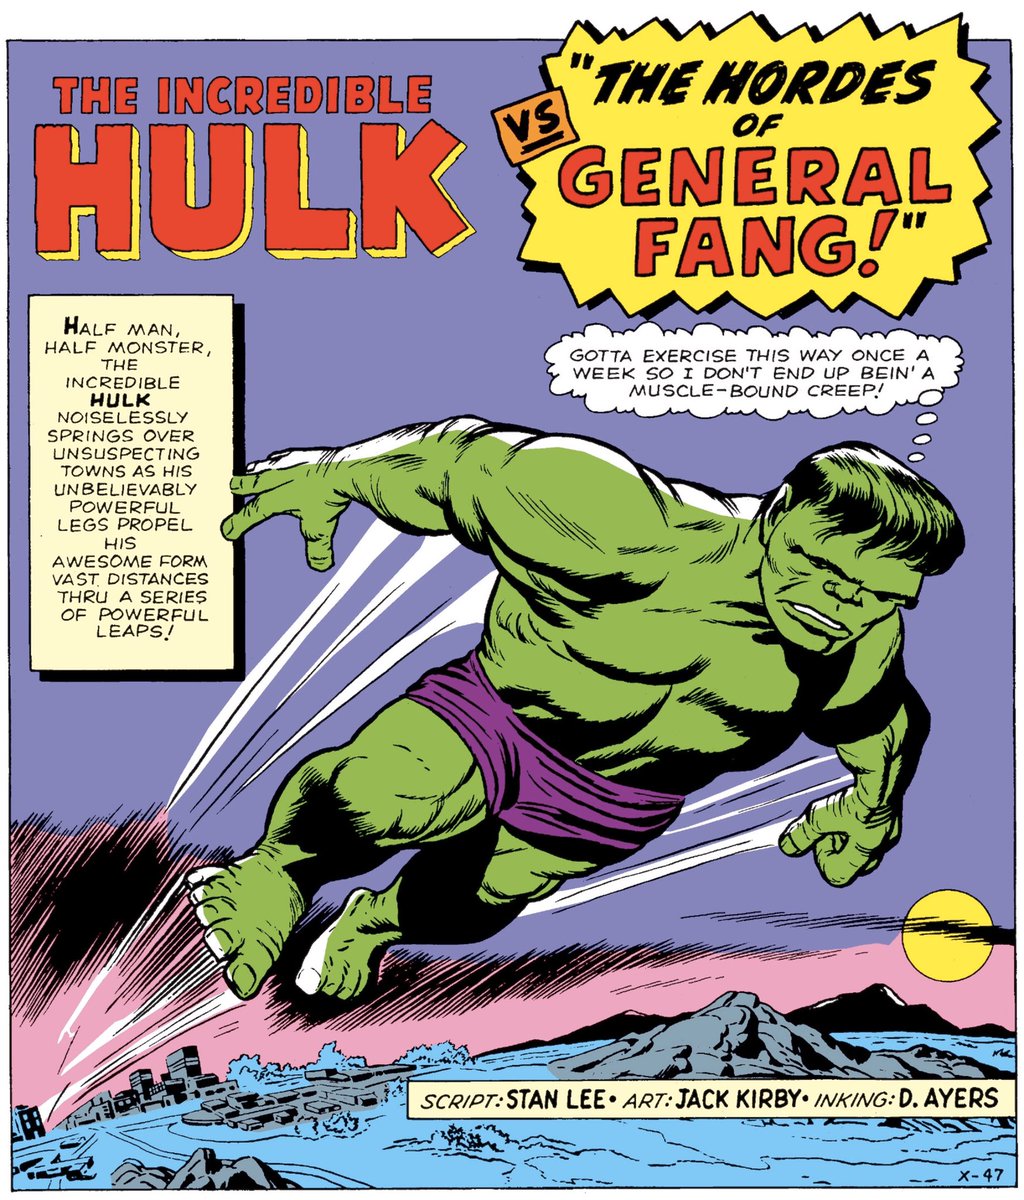 ...regardless, these early INCREDIBLE HULK stories, while inconsistent and incredibly silly, are still a ton of fun and I love ‘em!Also, how do Hulk and Rick not die instantly after getting a face full of volcanic gas, and how does exercising keep you from gaining more muscles?